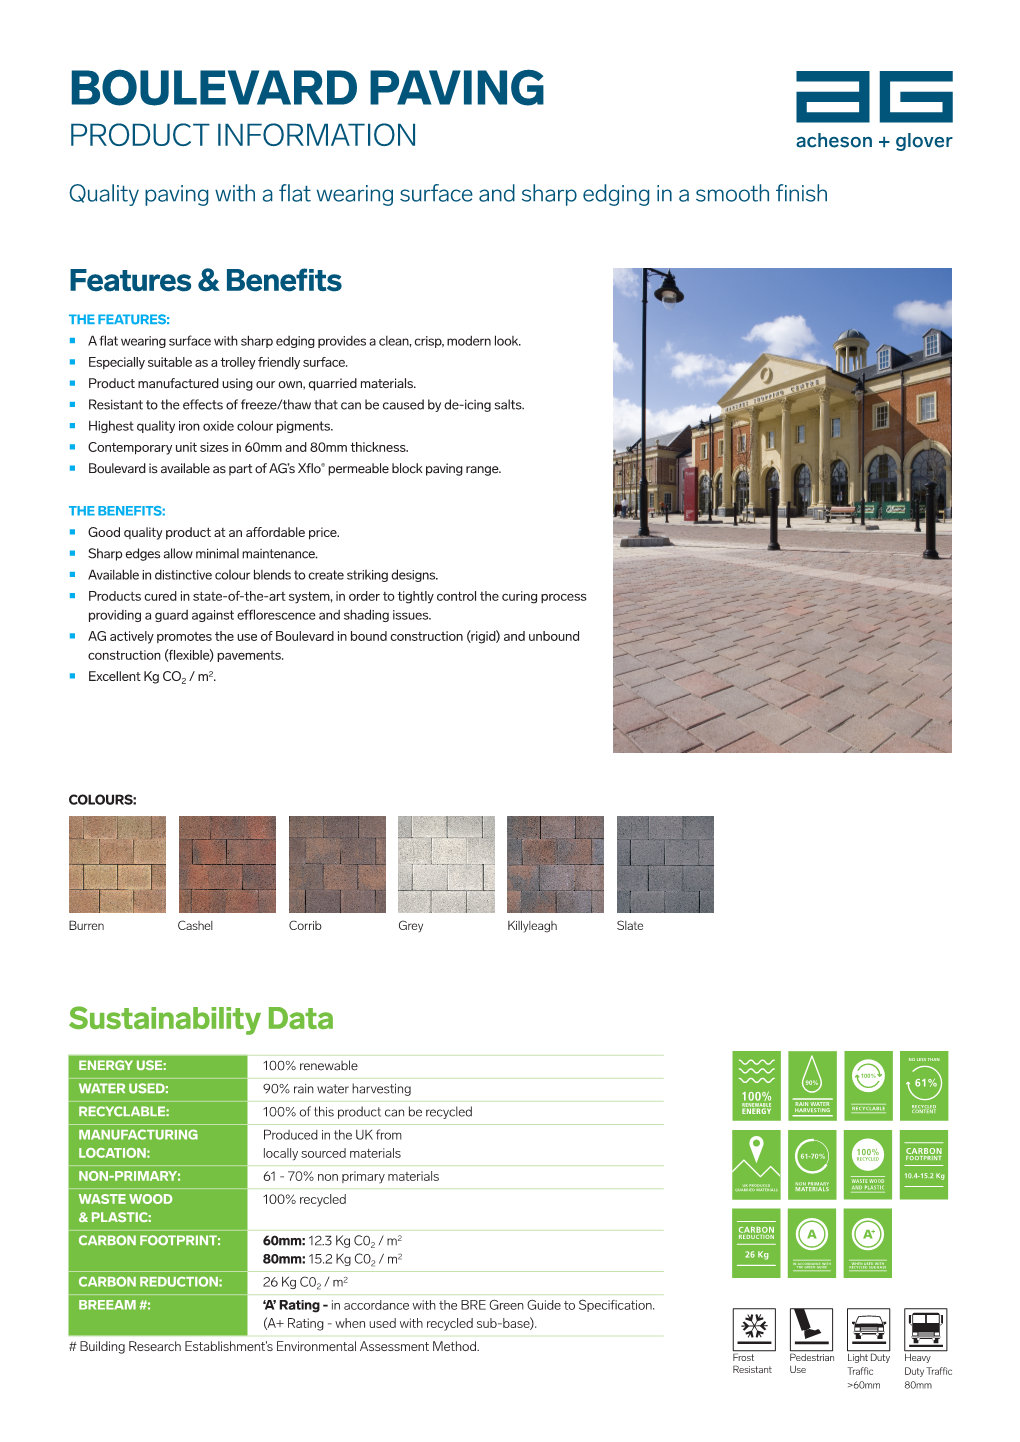 Boulevard Paving Product Information